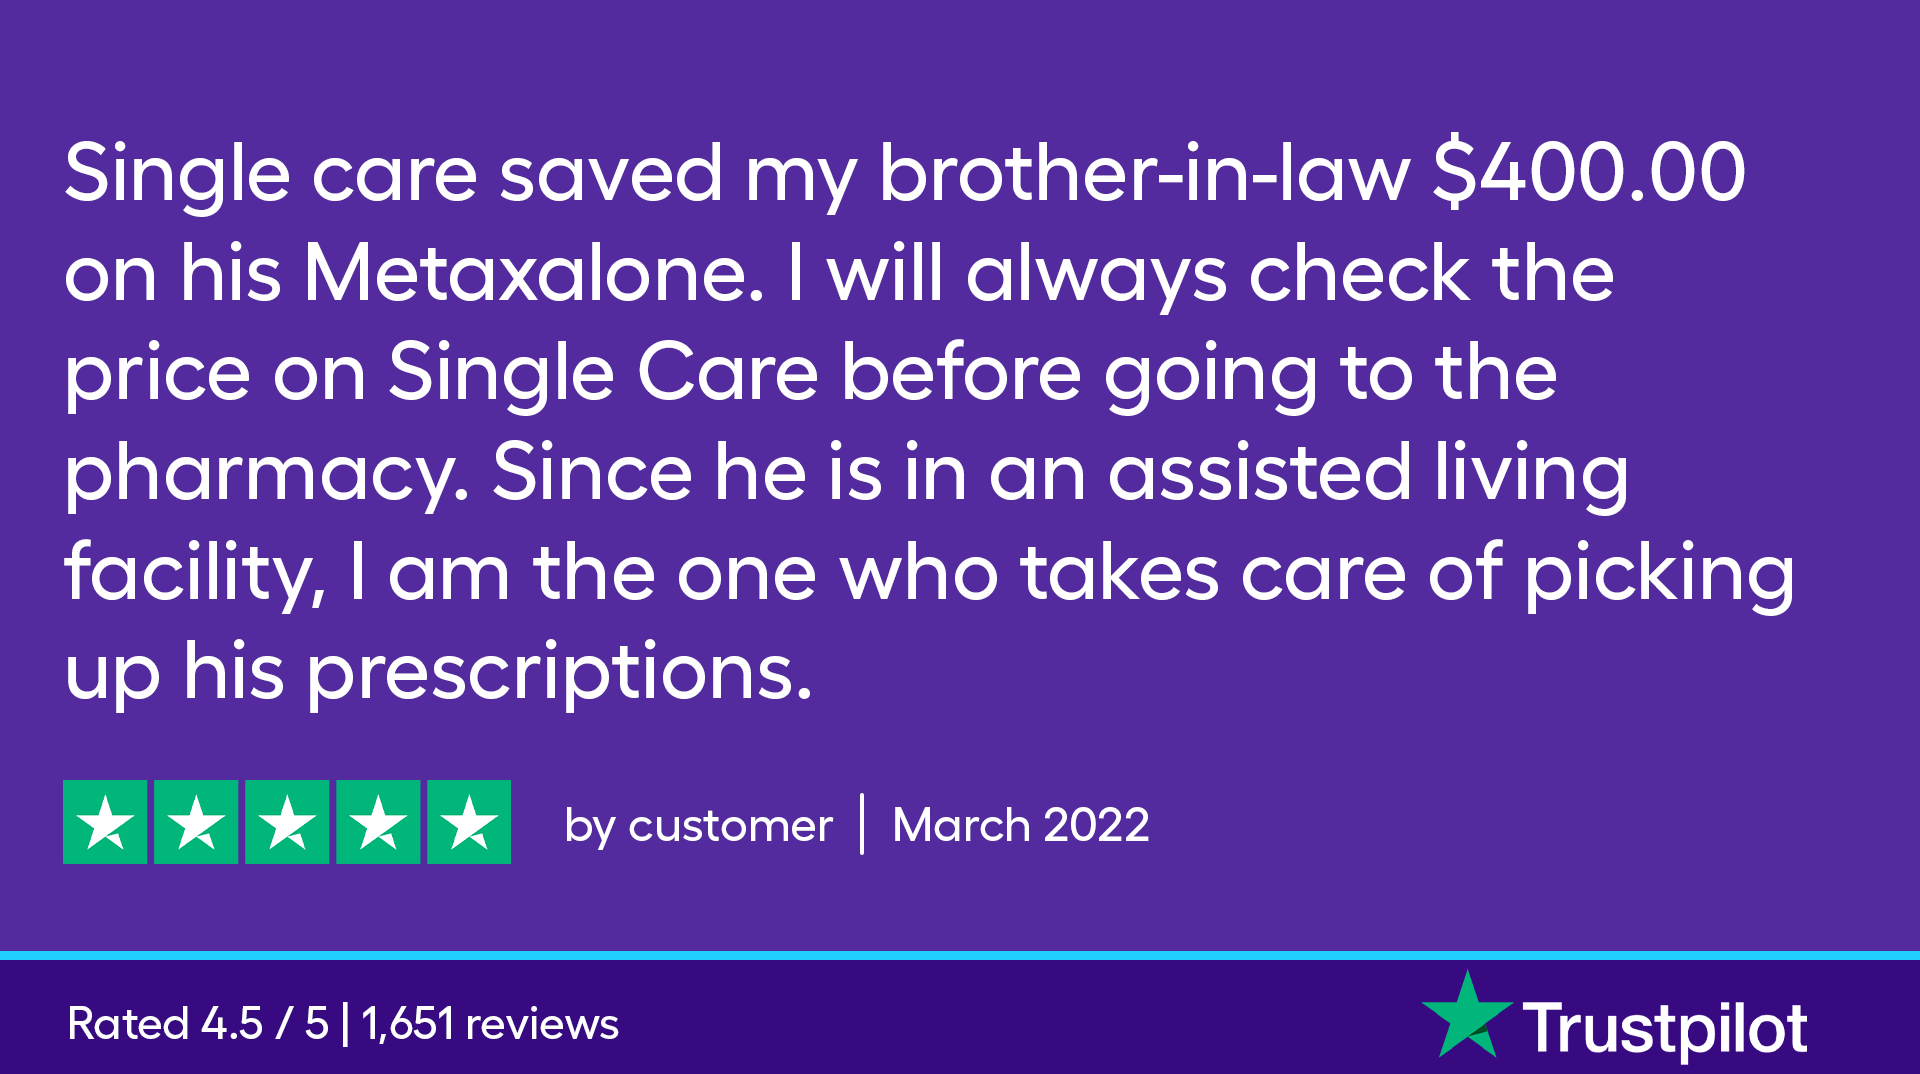 Single care saved my brother-in-law $400.00 on his Metaxalone. I will always check the price on Single Care before going to the pharmacy. Since he is in an assisted living facility, I am the one who takes care of picking up his prescriptions.